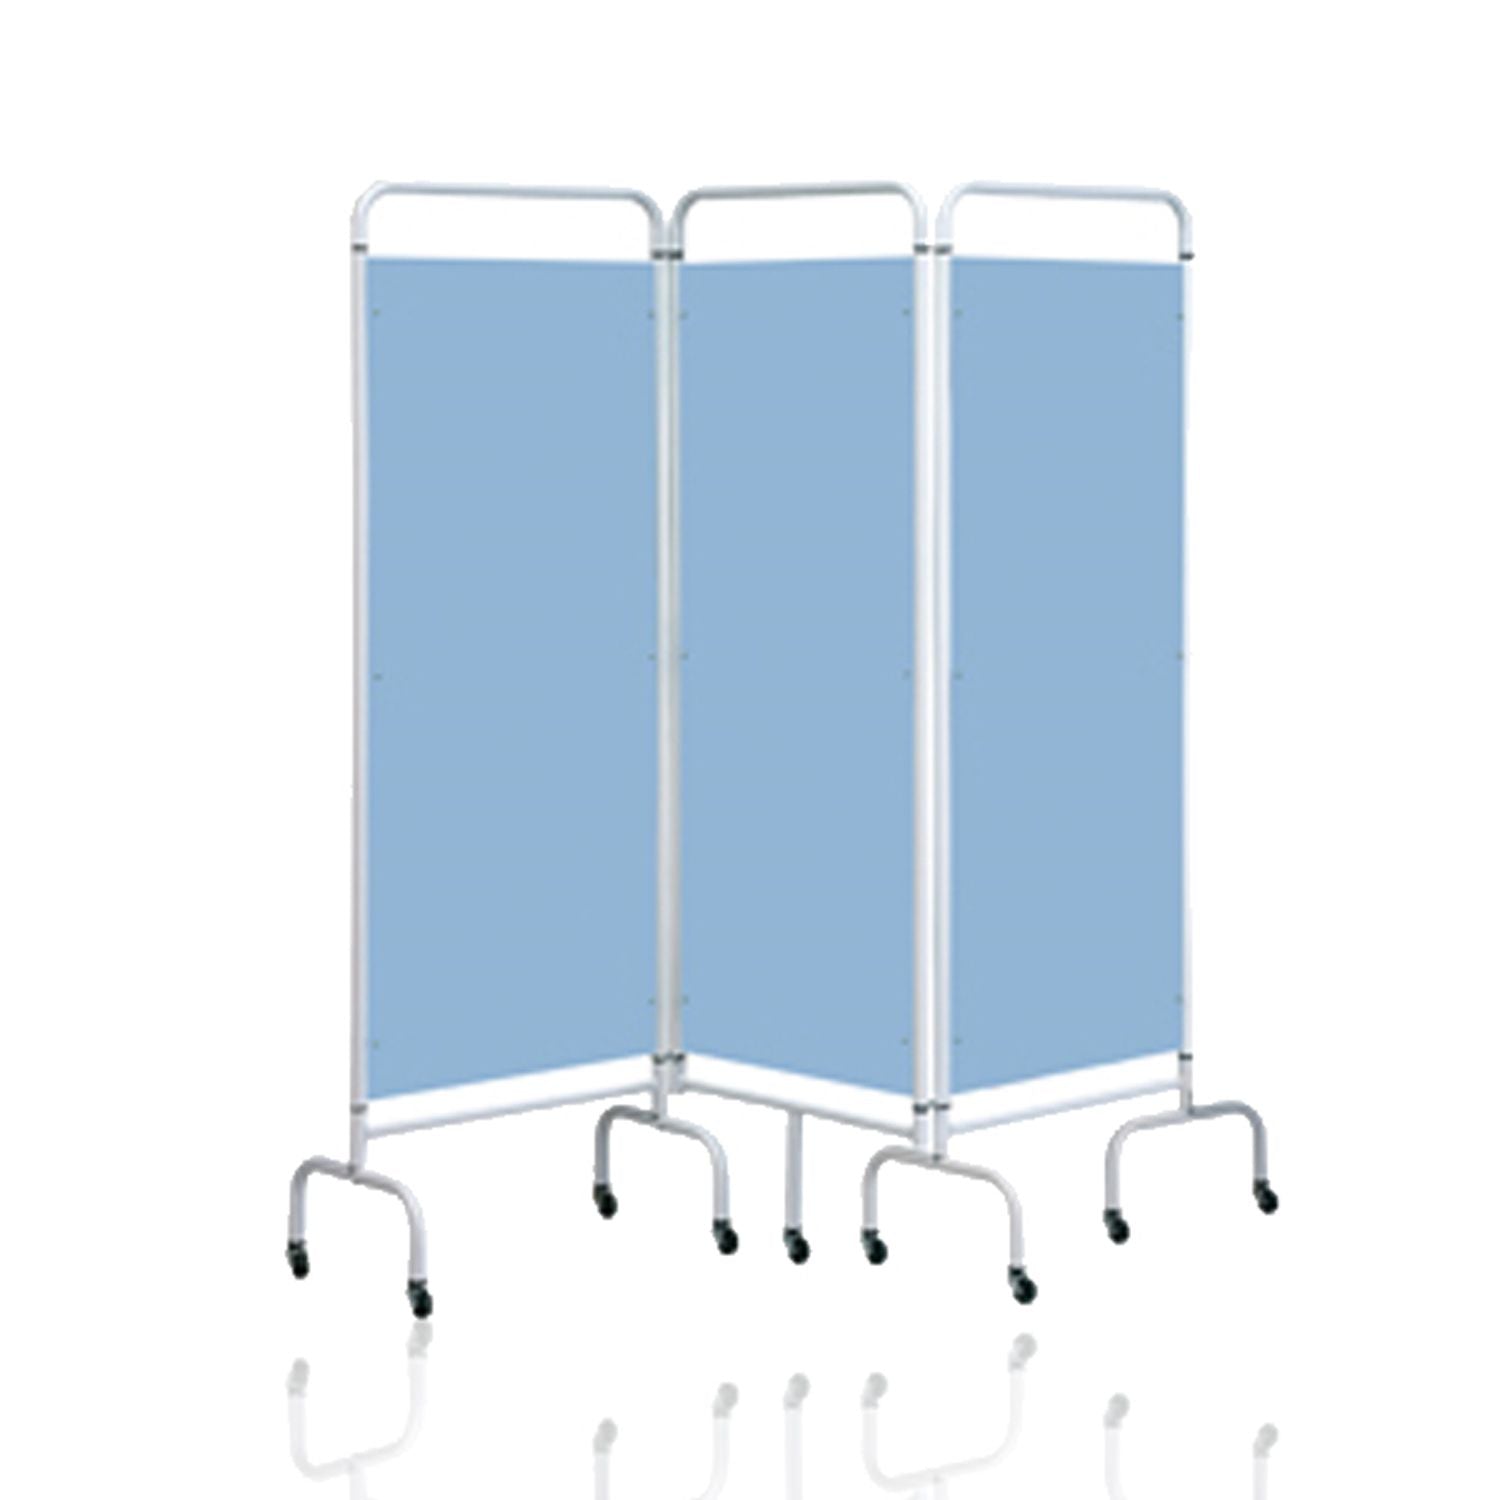 Sunflower 3 Section Mobile Folding Screen with Hygienic Disposable Curtains (10)